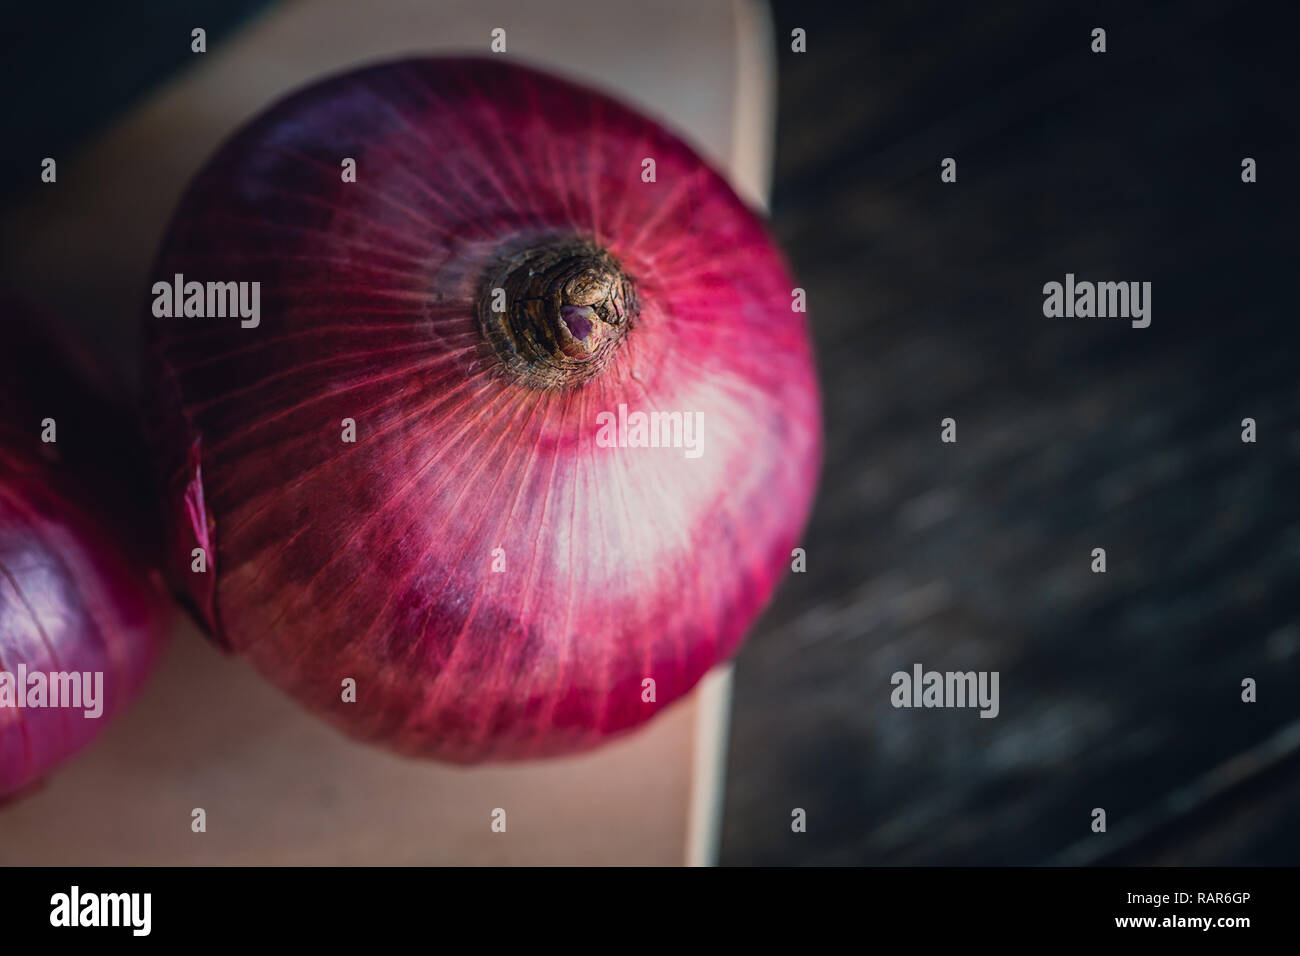 Shallot red onion on rustic wooden table background. Stock Photo